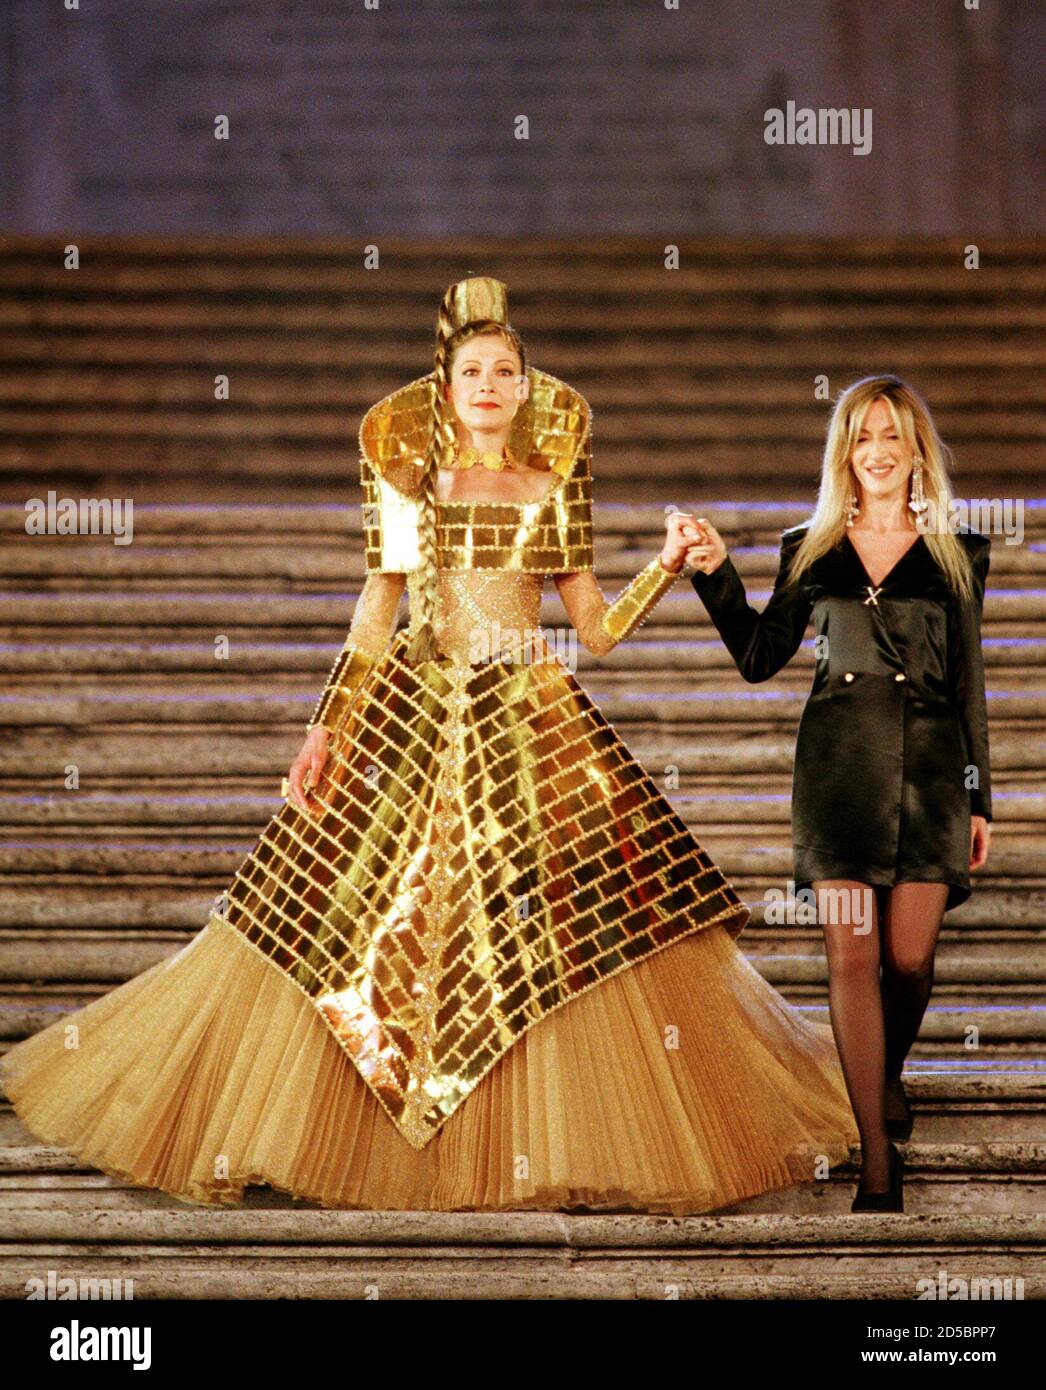 American model Deborah Moore (L) wears a dress made of gold by Italian designer Alexandra Fede (R) as part of her autumn/winter '99 collection during a fashion extravaganza gala at Rome's Spanish Steps which ended  Rome's high fashion week July 16. Some thirty fashion houses took part in  the show. Stock Photo